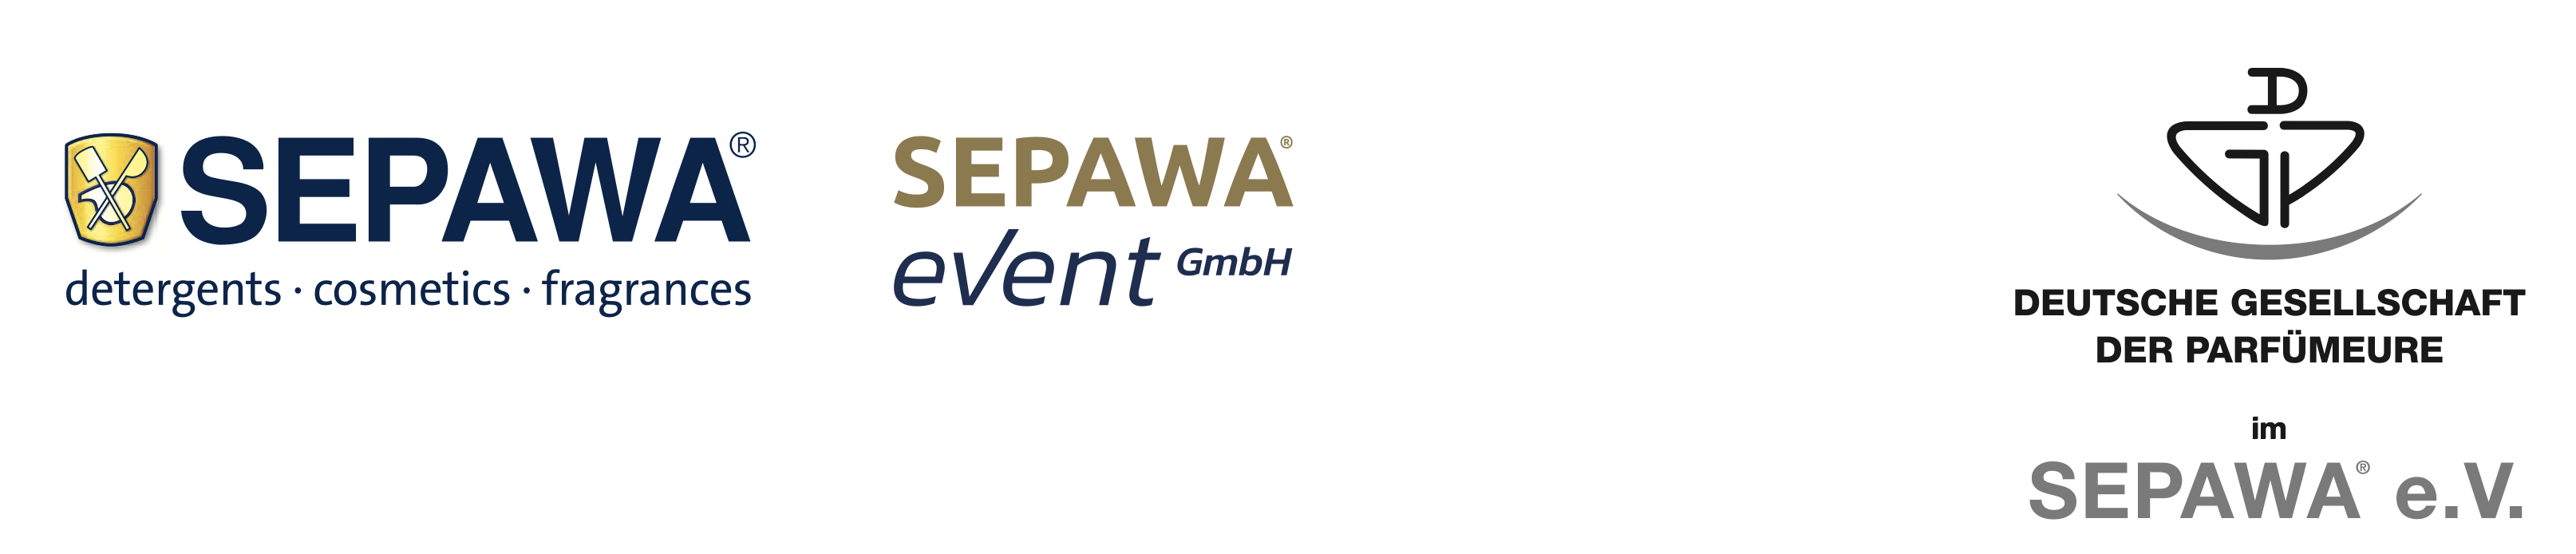 Lecture Event of the SEPAWA® Specialist Group "German Association of Perfumers in SEPAWA® e.V. (DGP)"